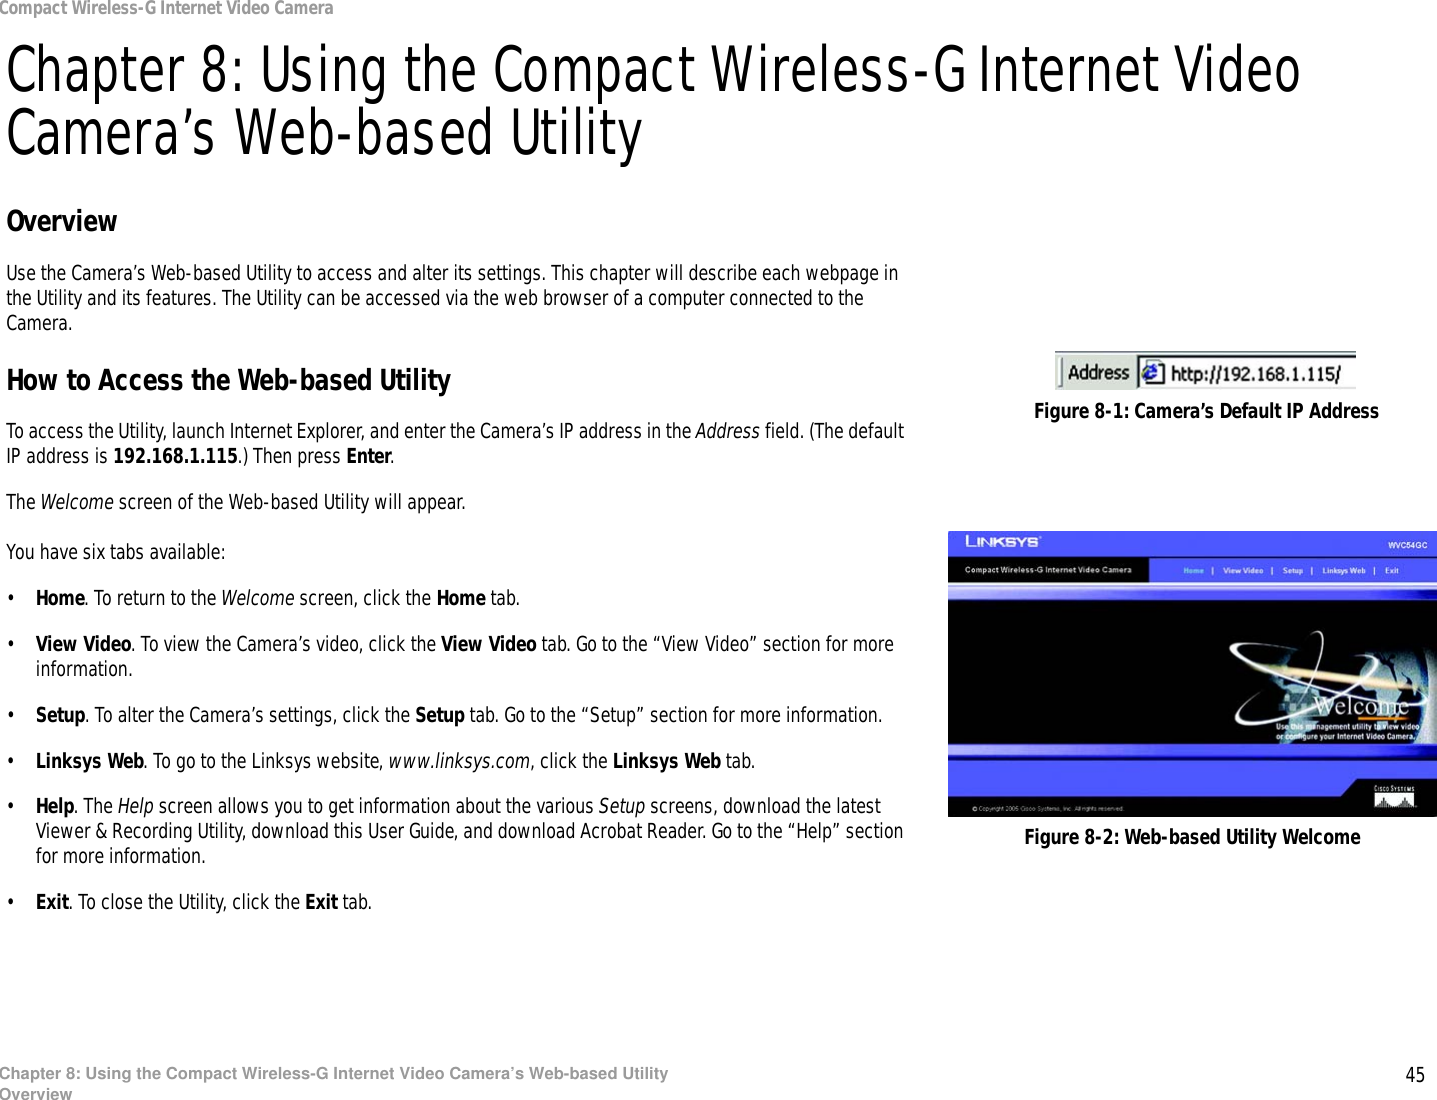 45Chapter 8: Using the Compact Wireless-G Internet Video Camera’s Web-based UtilityOverviewCompact Wireless-G Internet Video CameraChapter 8: Using the Compact Wireless-G Internet Video Camera’s Web-based UtilityOverviewUse the Camera’s Web-based Utility to access and alter its settings. This chapter will describe each webpage in the Utility and its features. The Utility can be accessed via the web browser of a computer connected to the Camera.How to Access the Web-based UtilityTo access the Utility, launch Internet Explorer, and enter the Camera’s IP address in the Address field. (The default IP address is 192.168.1.115.) Then press Enter.The Welcome screen of the Web-based Utility will appear.You have six tabs available:•Home. To return to the Welcome screen, click the Home tab.•View Video. To view the Camera’s video, click the View Video tab. Go to the “View Video” section for more information.•Setup. To alter the Camera’s settings, click the Setup tab. Go to the “Setup” section for more information.•Linksys Web. To go to the Linksys website, www.linksys.com, click the Linksys Web tab.•Help. The Help screen allows you to get information about the various Setup screens, download the latest Viewer &amp; Recording Utility, download this User Guide, and download Acrobat Reader. Go to the “Help” section for more information.•Exit. To close the Utility, click the Exit tab.Figure 8-2: Web-based Utility WelcomeFigure 8-1: Camera’s Default IP Address